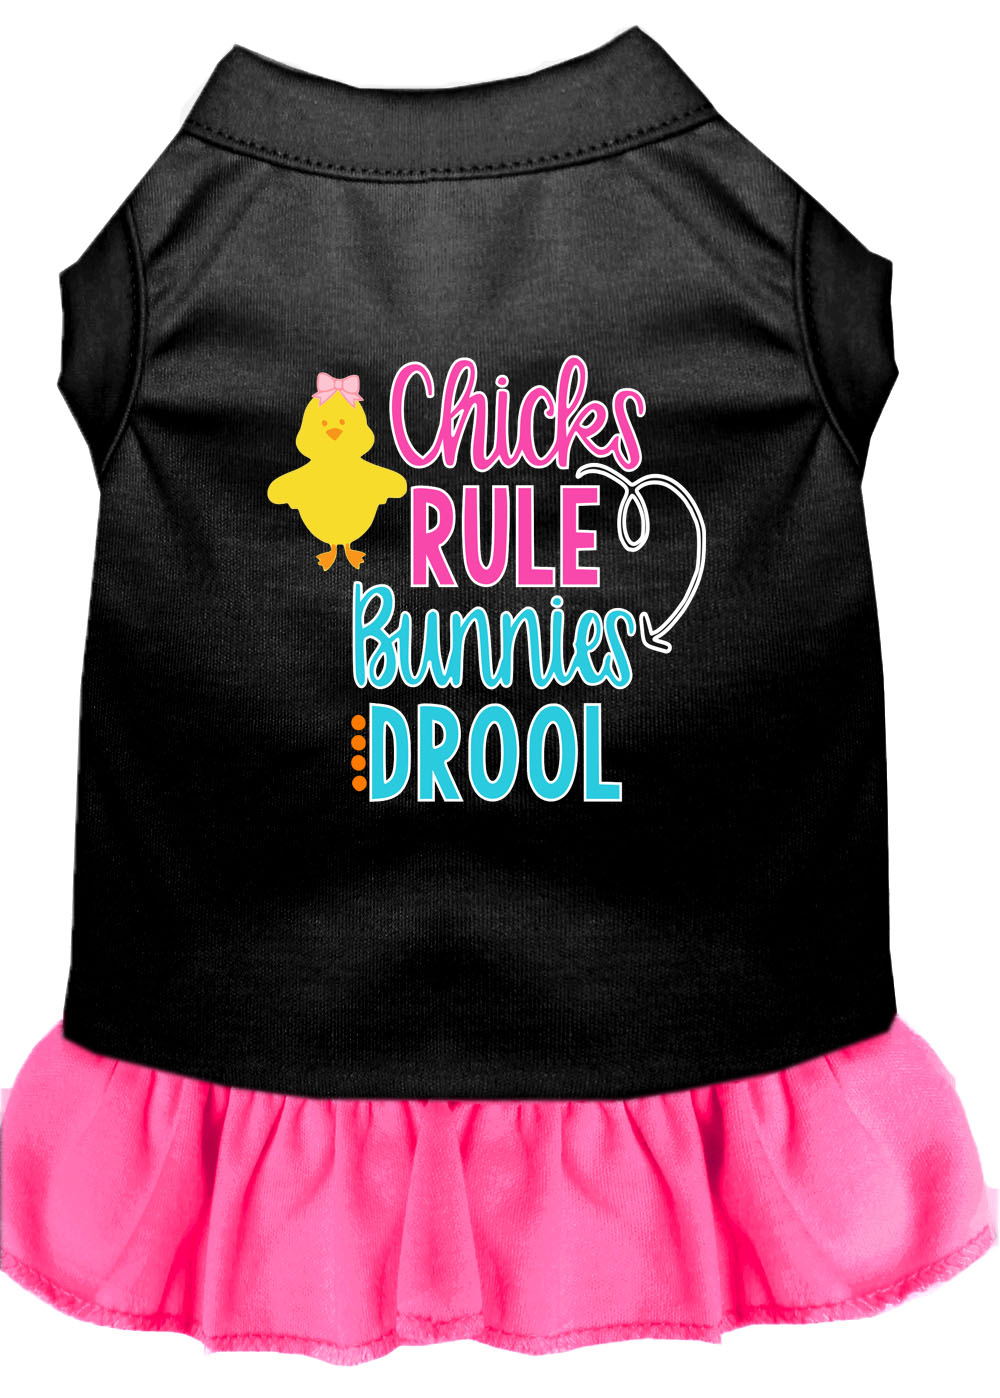 Chicks Rule Screen Print Dog Dress Black with Bright Pink Med